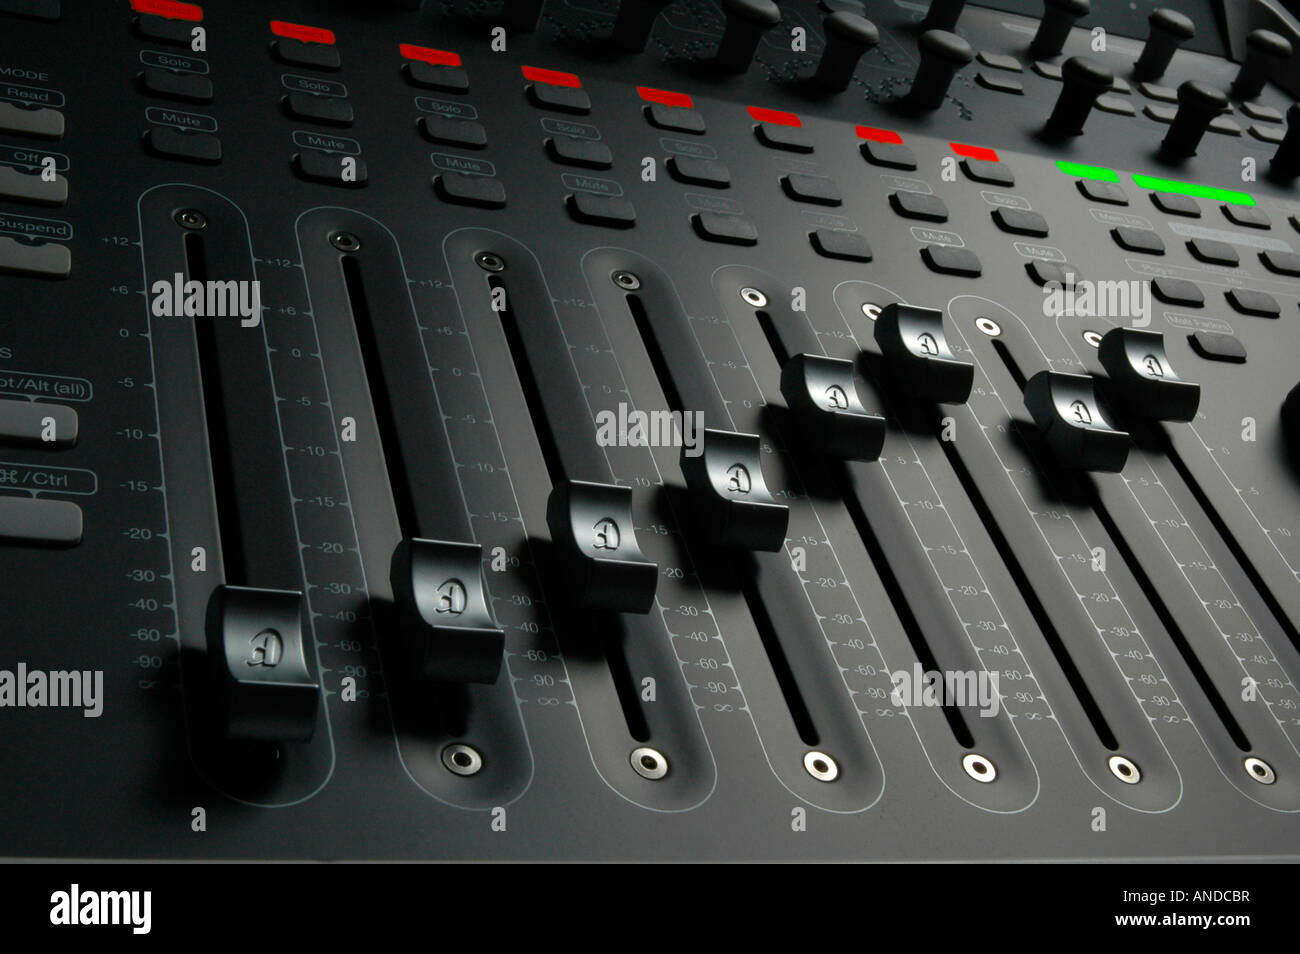 https://c8.alamy.com/comp/ANDCBR/audio-mixing-mixer-board-sliders-from-a-professional-music-and-sound-ANDCBR.jpg